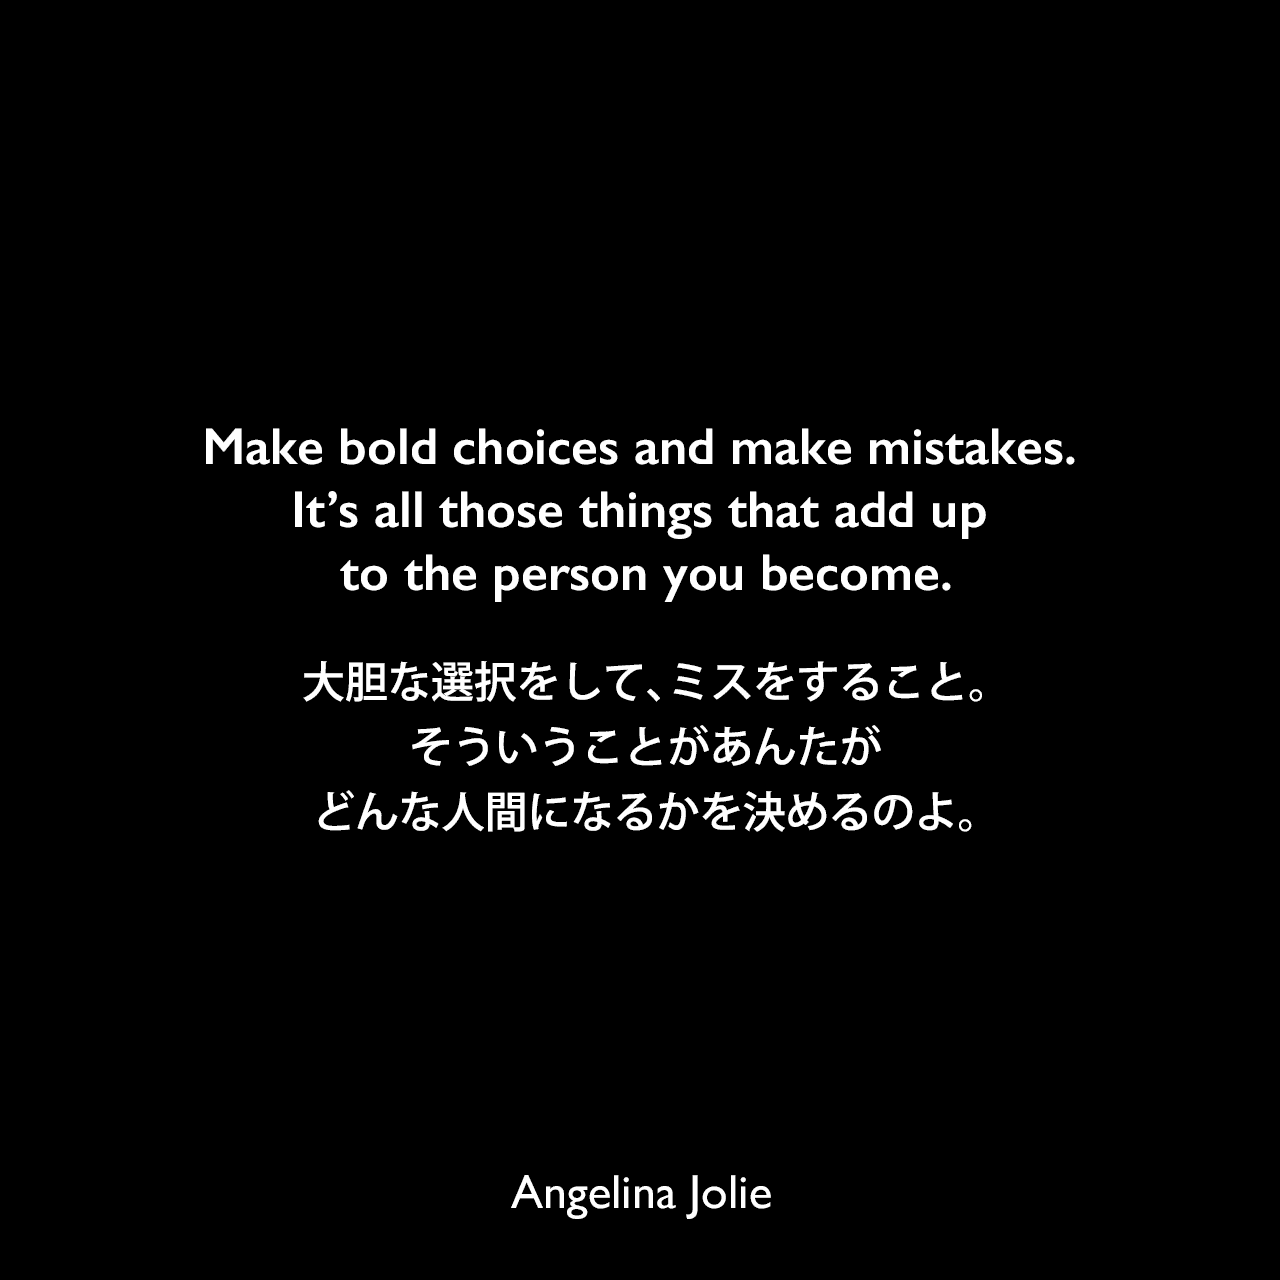 Make bold choices and make mistakes. It’s all those things that add up to the person you become.大胆な選択をして、ミスをすること。そういうことがあんたがどんな人間になるかを決めるのよ。Angelina Jolie